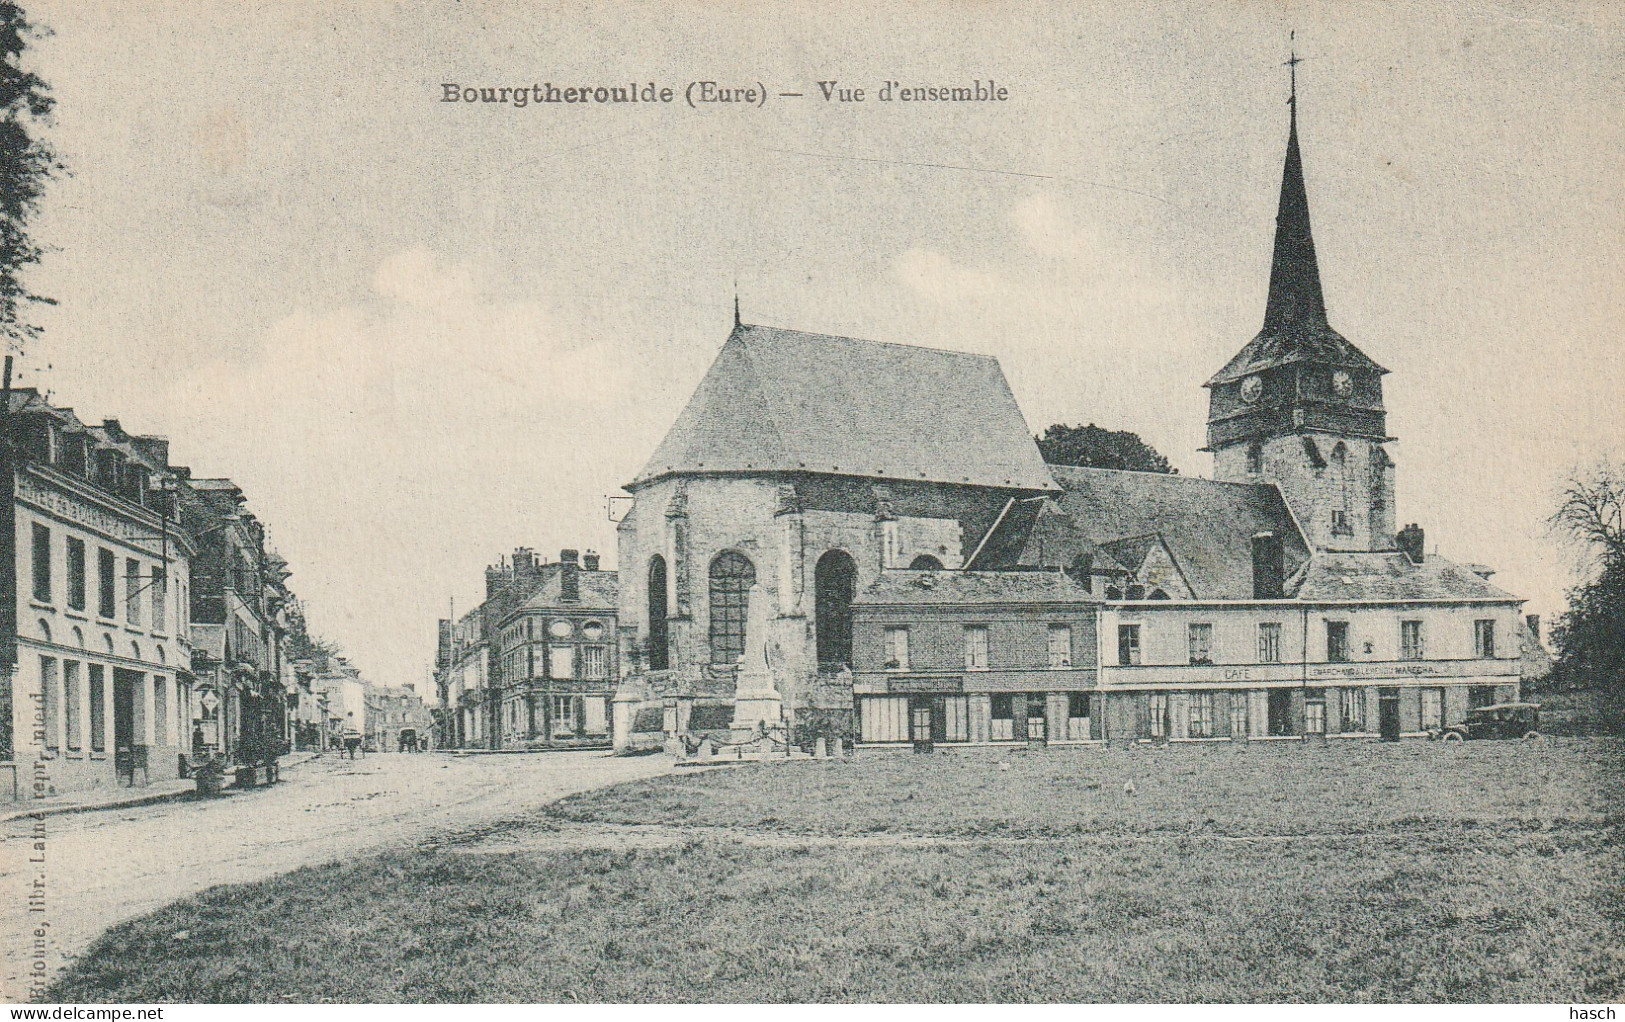 4912A 263 Bourgtheroulde, Vue D’ensemble - Bourgtheroulde